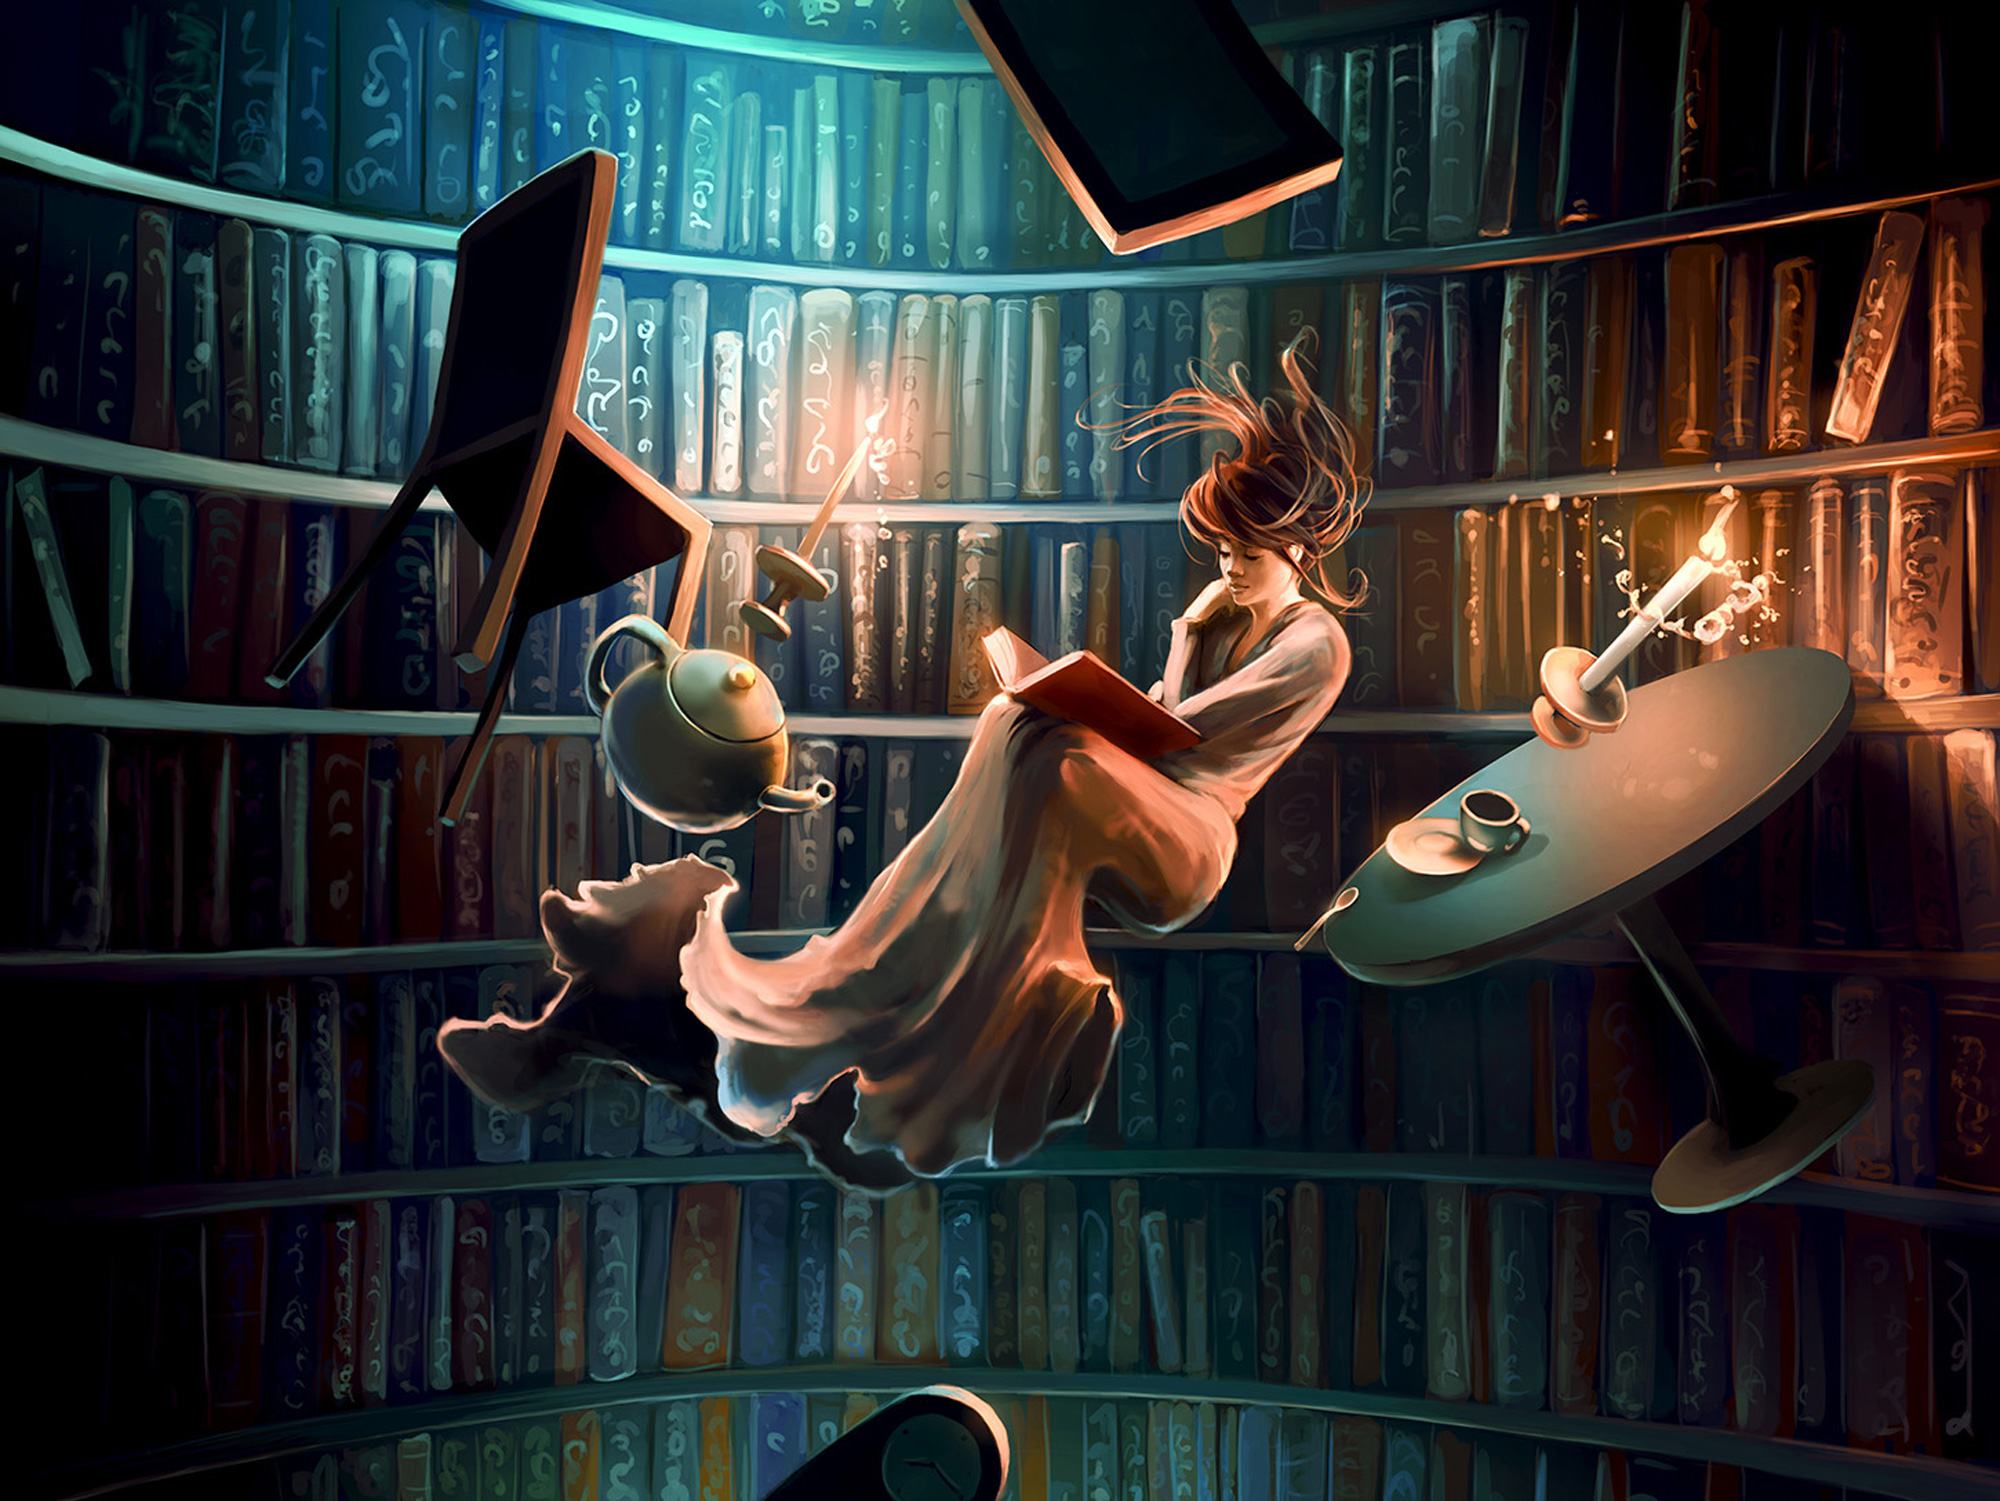 Digital Art Artwork Surreal Floating Books Shelves Chair Table Women Candles Teapot Cup Spoon Painti 2000x1501